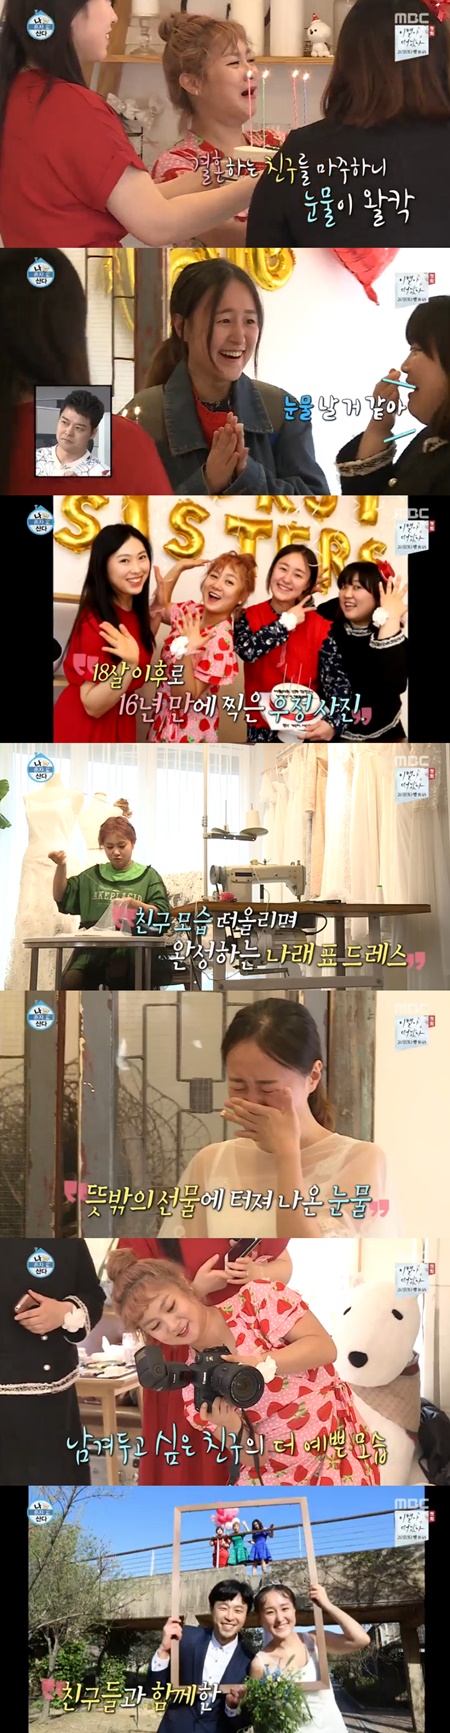 I live alone Park Na-rae has prepared an event for the bride-to-be Friend.In the MBC entertainment program I Live Alone broadcasted on the afternoon of the 18th, Park Na-rae was preparing for a 100% hand-made wedding shoot for his 17-year-old best friend.On the day, Park Na-rae prepared a bridal shower for the 17-year-old Ziggy Friend, who is about to marry in May.Park Na-rae and two Friends staged a party with a cake.But when the bride-to-be Friend arrived, both Park Na-rae and Friends drew attention with tears.They took pictures together for a long time after taking pictures together at the age of 18.Park Na-rae, who received Friends wedding invitation, felt a complex nuance.Friends said, I was okay with my brother Kian84, he said. Its good to be so honest.Park Na-rae then laughed, saying, What I am sure is that my brother has a heart.Park Na-rae left Friend baffled by presenting sexy underwear for Friends first nightFriend, who received it, said, I do not know where to rely, he said, Is not it a ribbon?Park Na-rae also made his own wedding dress for his close friend, who was in small weddings; two weeks ago he visited a dress shop and challenged him to make a dress.He worked with a serious expression, demonstrating his craftsmanship.Friend, who received the dress, said, It was so impressive because it was a dress made by a person who really knew me.Park Na-rae also blushed, saying, It was like sending a daughters marriage.Park Na-rae has stepped out with Friends for filming inspired by the wedding concept in the American drama Sex and the City.I made my own bouquet and reflector, and after finishing the preparation in advance, I found Seonyudo.During the filming, the husband of the bride-to-be Friend appeared in a surprise with a hidden camera prepared by Park Na-rae.Friend wept again and once again shed tears in a letter prepared by her husband.Park Na-rae later said in an interview, When I was a high school student, my father died and I leaned a lot on friends.I tried to give up my studies because I did not have money, and when I could not eat rice, Friends helped me. He said, I want to do as much as I can now. On the show, Henry Lau showed off his muscles with protein drinks as soon as he woke up in the morning, and Jun Hyun-moo admired it as the forearm is the madongseok.Henry Lau said: Im changing a bit these days, Im getting to shoot a China historical martial arts movie.The role is the king, he said. It is hard to make a body and study Chinese. Lee Si-eon laughed jealously, saying, I do not want to be the person who makes the main character suddenly.Recently Henry Lau unveiled a new house as he left camping with three dicks Lee Si-eon, Kian84 and Ulleungdo.Henry Lau has unveiled a top-man exercise method that uses the new house as 200%.He put his legs on the sofa and pushed up the hardships, and he was immersed in the exercise while exercising in front of the mirror.The appearance of him crawling around the house and using the new house properly reminded him of a spider and caused laughter.Henry Lau frequently checked his muscles during exercise, posed for strength in his arms in front of the mirror, and even became self-indulgent, even proud of his muscles. He said, I will be in shape now!I was very motivated to burn.Henry Lau took Wushu classes as part of his acting exercises; he looked charismaticly at the cactus in front of him, but soon gave up, sick.Unlike his motivation, he was helpless by his teacher in practice.Henry Lau sought advice on historical drama acting in search of Im Yoon-ah, who had historical drama experience.Im Yoon-ah has already appeared in a famous China drama that has surpassed 10 billion views.Im Yoon-ah asked him to show me one of the performances I want to show you.Henry Lau said: Think of the China version of Gladiator.A person like an instructor comes out and says, Who ate my water, I said, I ate it. He explained the scene where he would play.Henry Lau, after a long explanation, showed a performance, but he laughed as if he were a soft dialect.Im Yoon-ah, who saw Henry Laus performance, said: I think we should focus on acting, I think were thinking too much.I would like to act with the heart of the character who just said, I will work hard for my colleagues.Just do not get stressed and make it comfortable, Henry Lau said, I feel like a mother.On the other hand, I live alone is broadcast every Friday at 11:10 pm.Photo  Capture MBC Broadcasting Screen